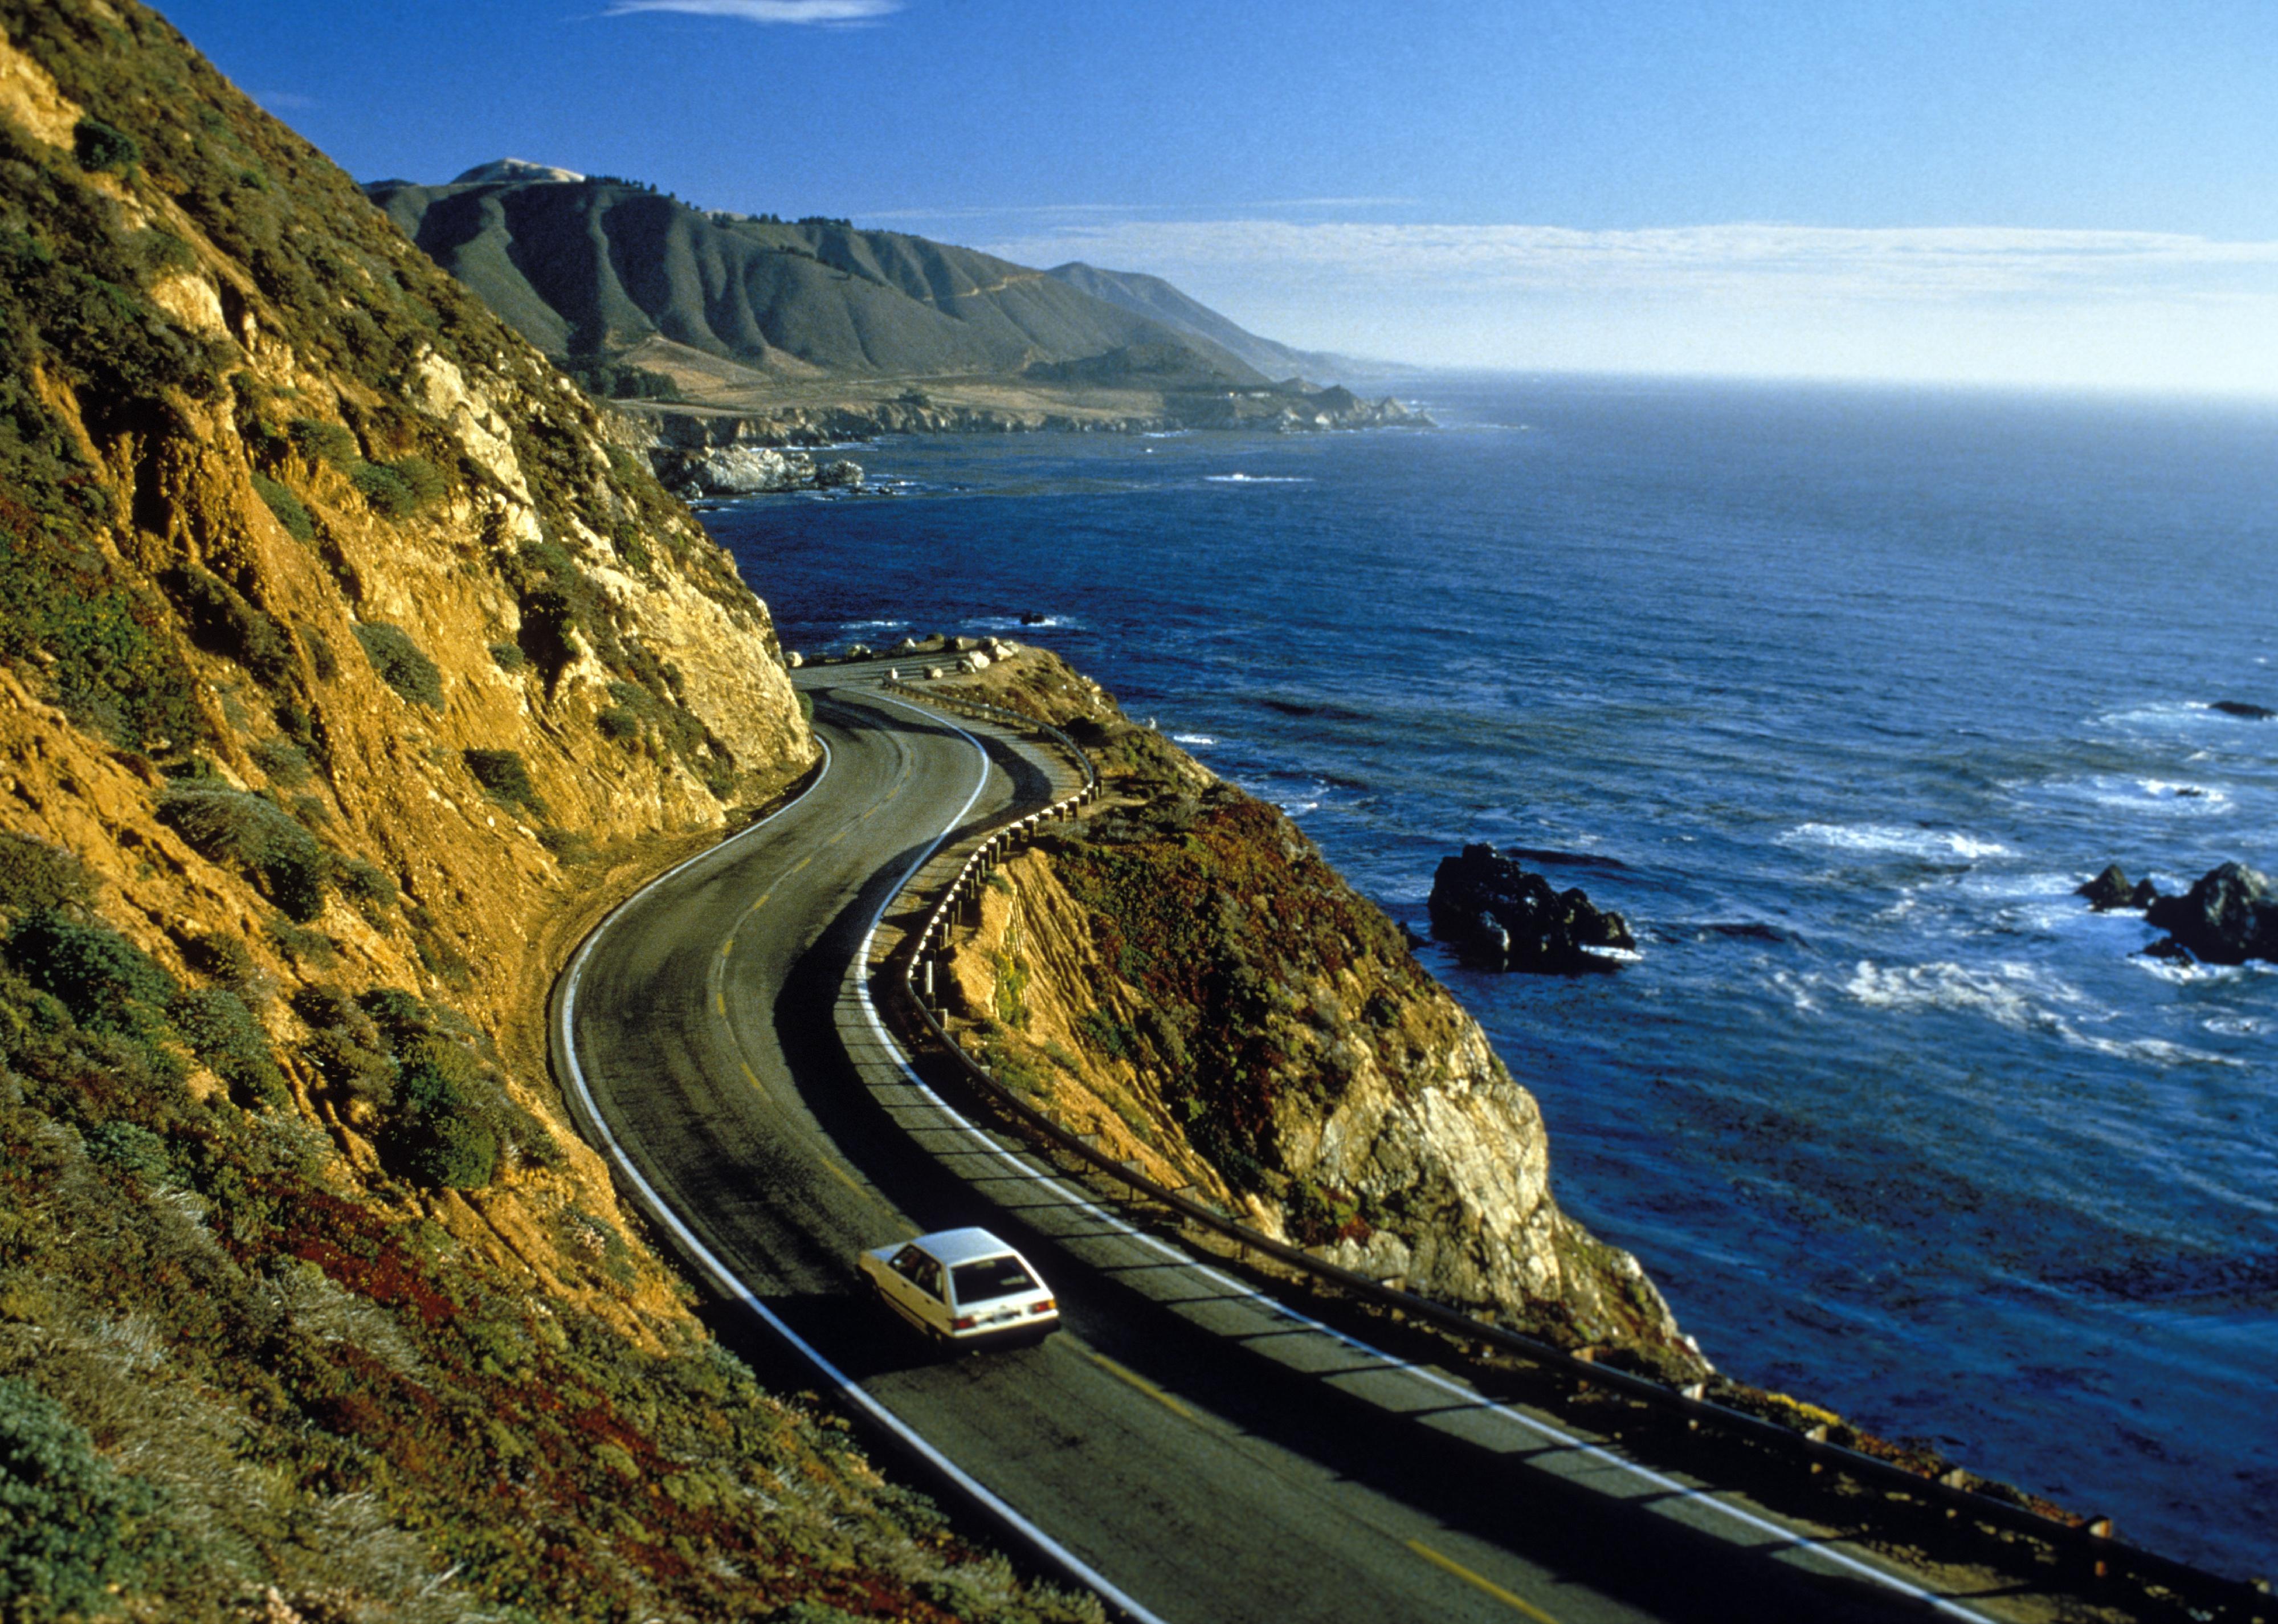 <p>Talk about jaw-dropping views: California's Pacific Coast Highway, constructed in the 1930s, offers some of the most impressive road trip views in all of America. Stretching nearly 660 miles from San Fransisco to San Diego, the stretch can be traveled in just 10 hours, but nearly all travelers suggest drawing out the drive so you can take in all the trip has to offer.</p>